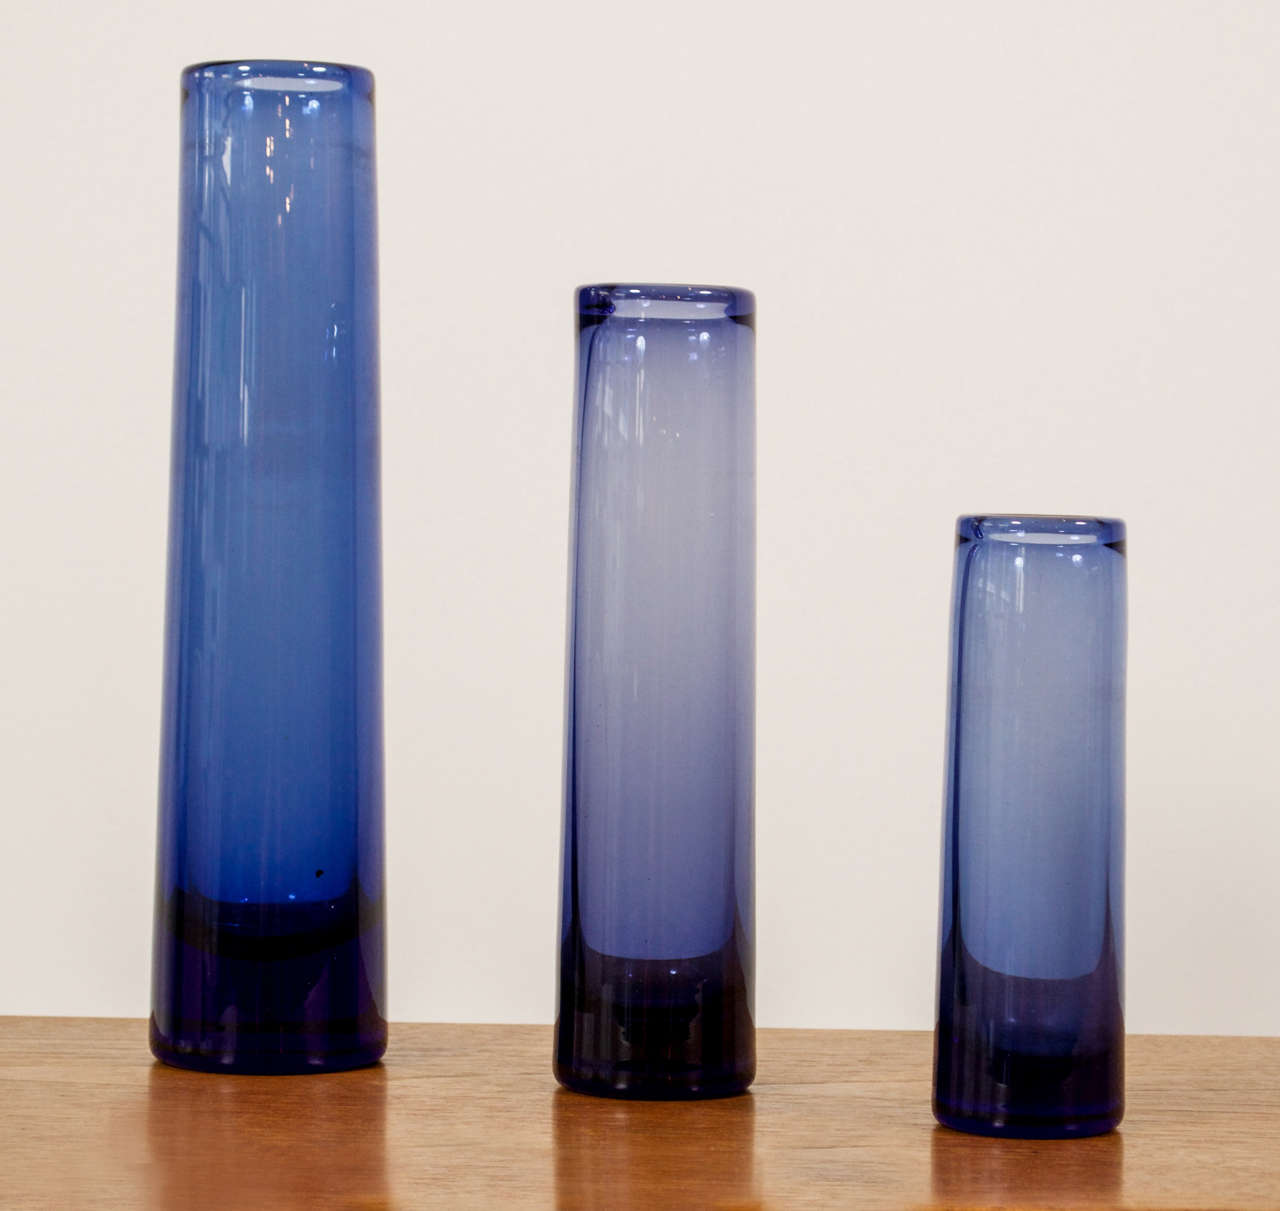 A group of three glass vases in various heights and shades of blue by Per Lutken for Holmegaard.
We have many varieties of shapes and sizes in the glass work of Per Lutken.  Please call for more information.